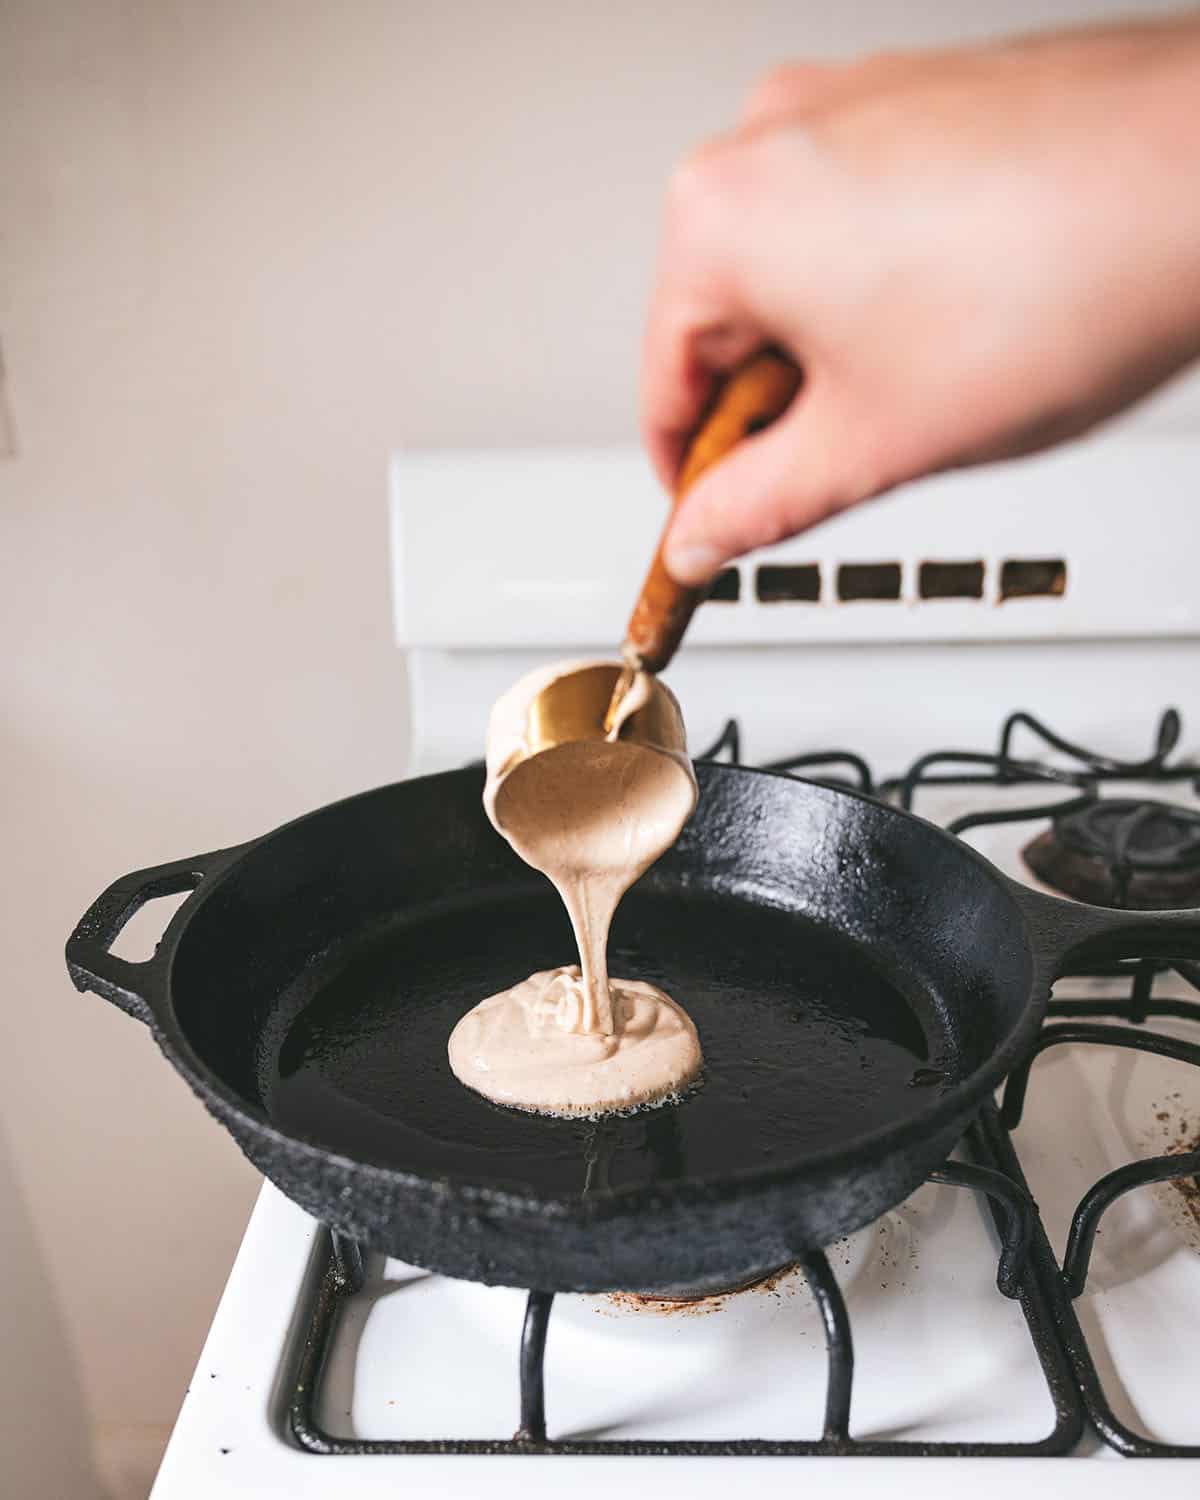 Pancake batter being poured with a measuring cup into a cast iron pan on a gas stove. 